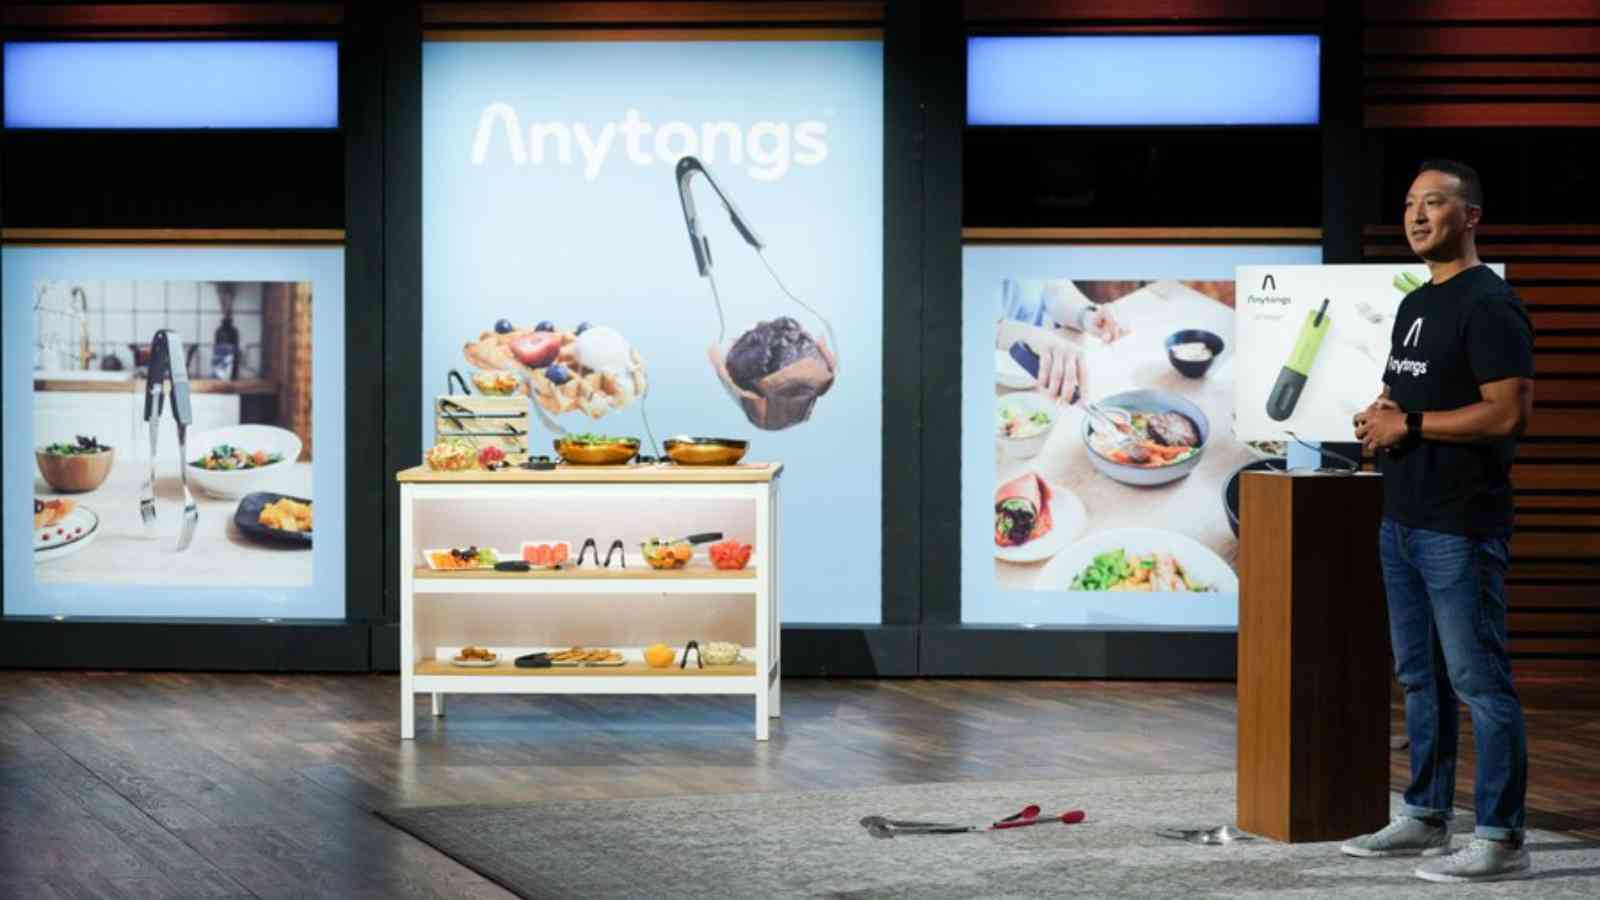 What Is AnyTongs? Did it Skyrocket after Shark Tank